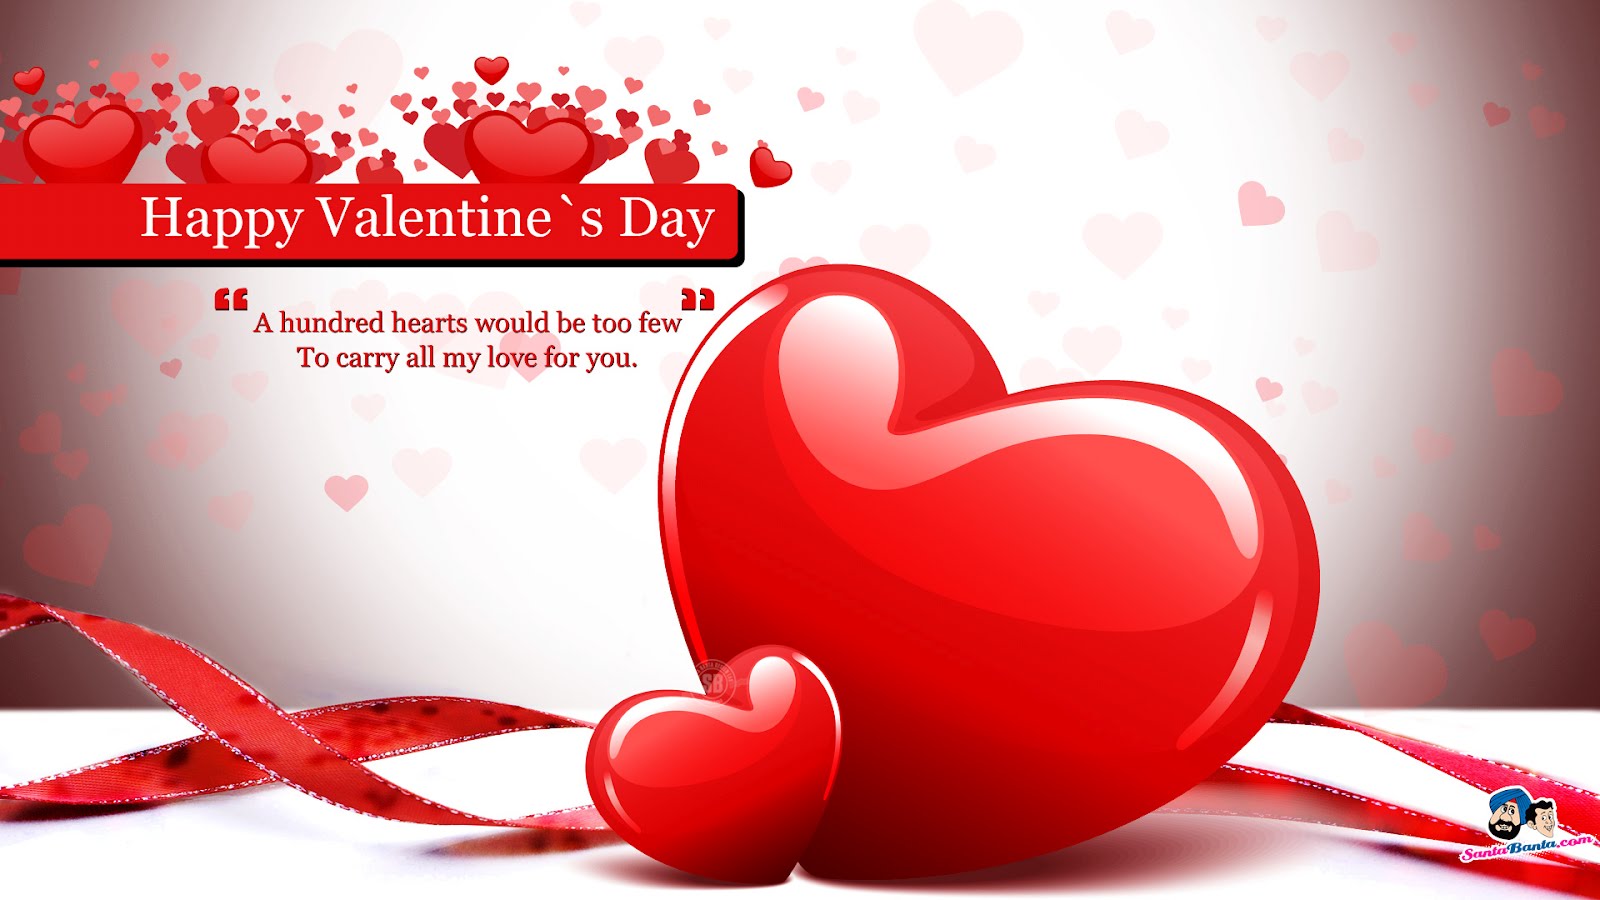 happy-elegant-template-valentines-day-cards-hearts